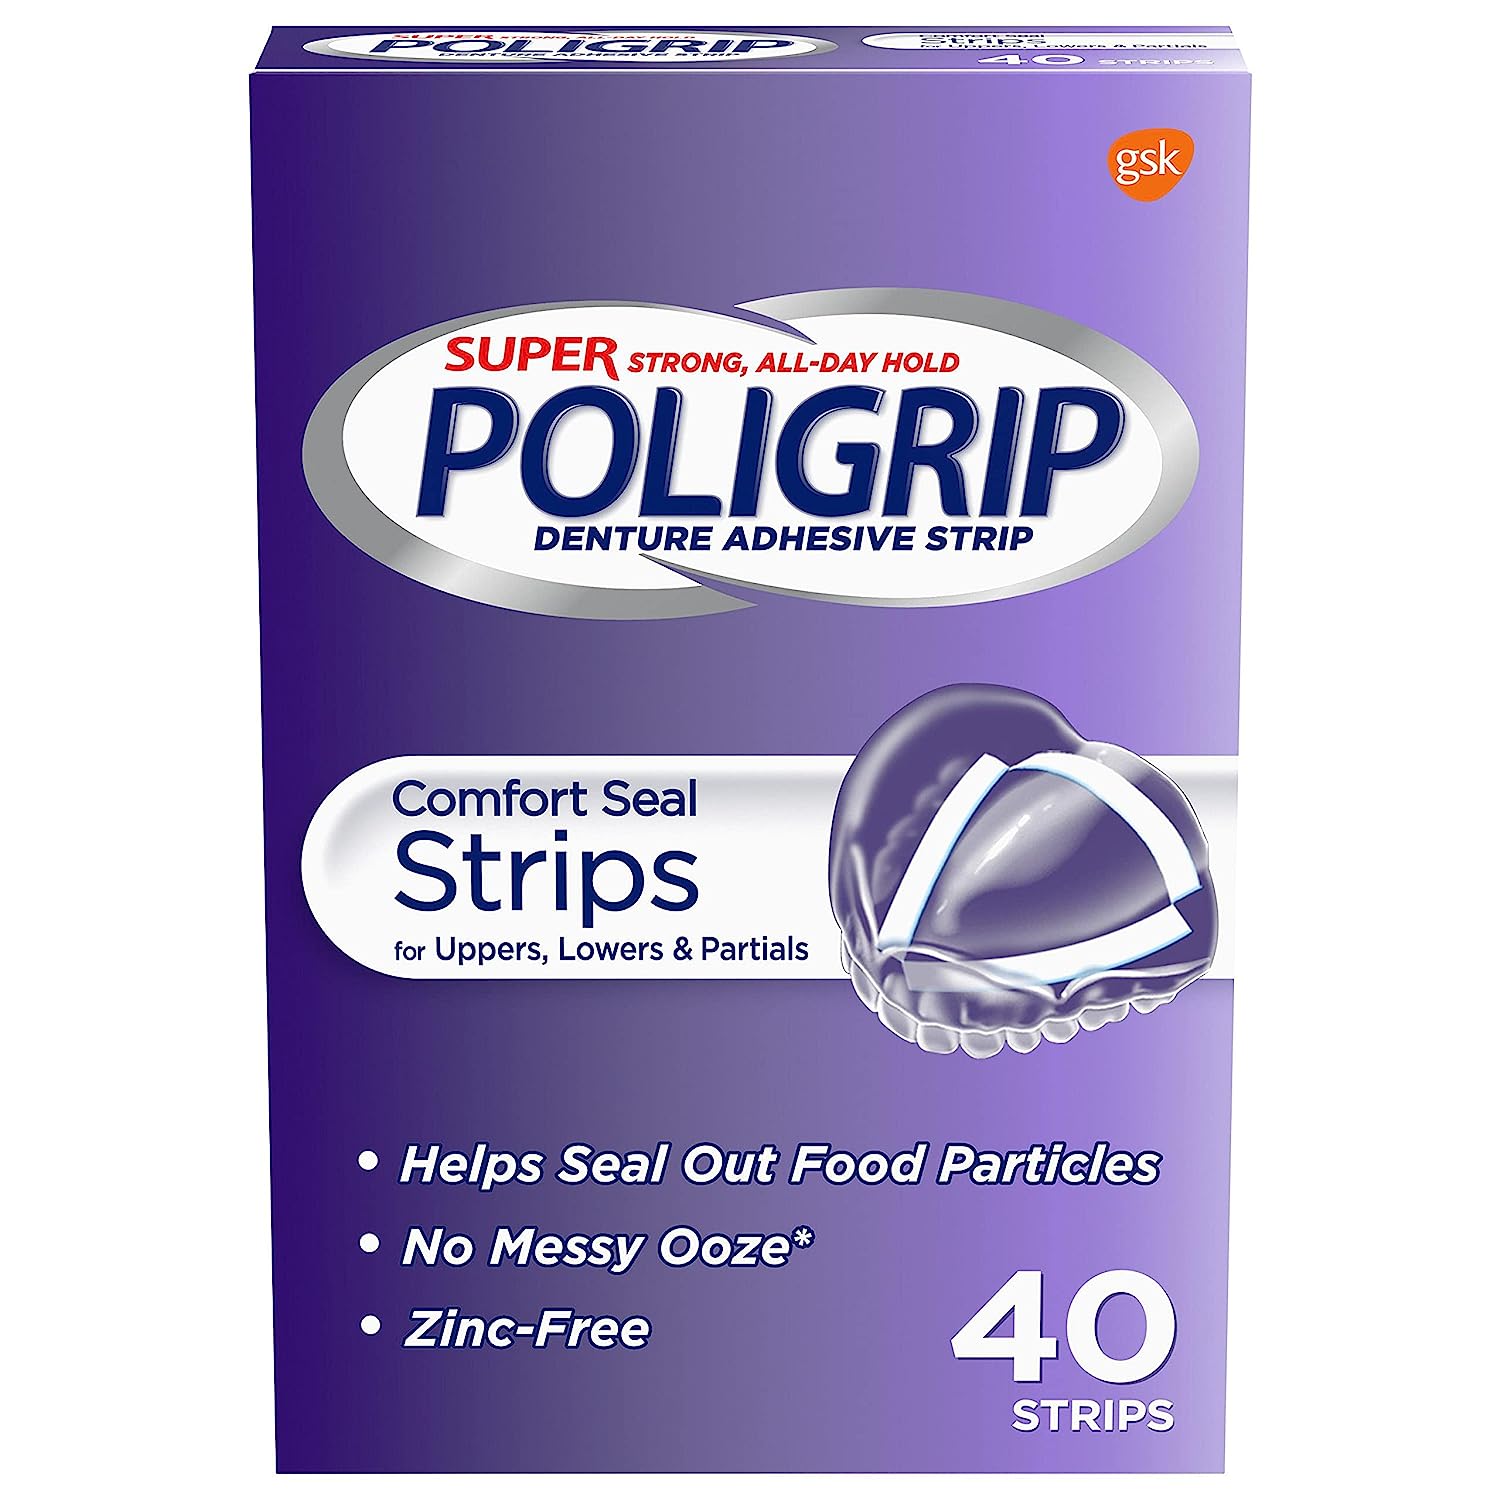 Super Poligrip Strips Size 40 Ct Poligrip Strong All [...]